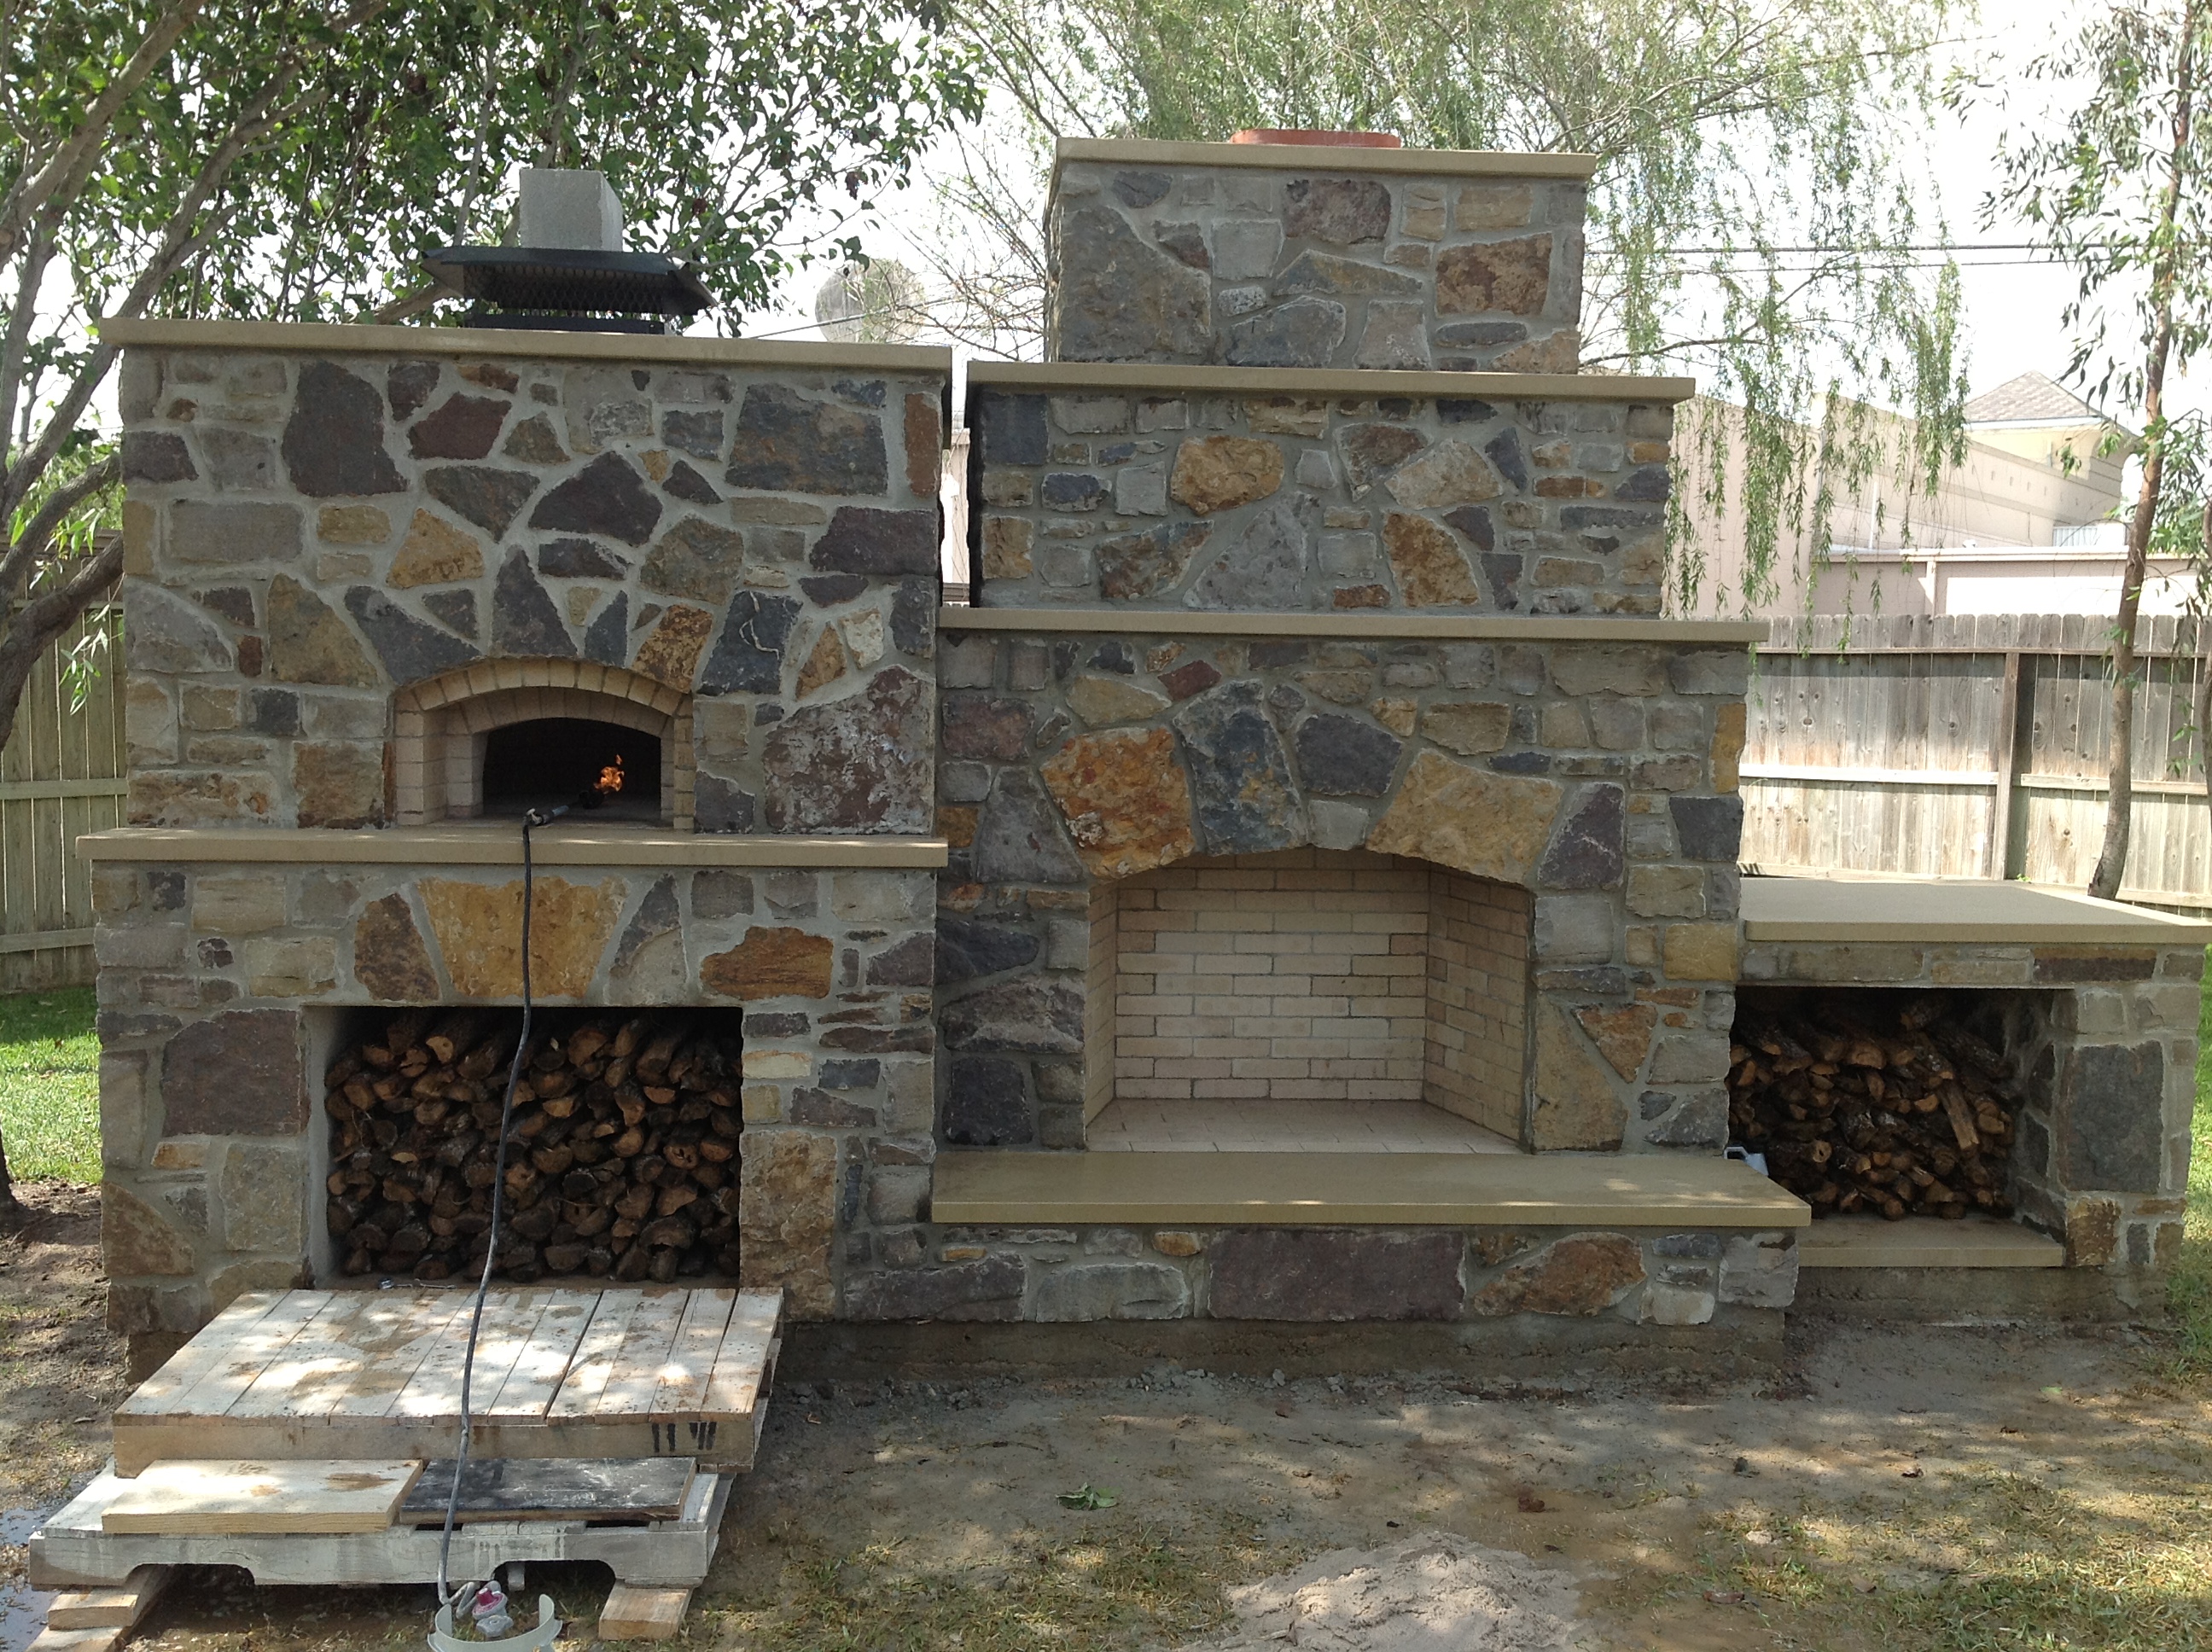 http://texasovenco.com/wp-content/uploads/2013/10/pizza-oven-curing-propane.jpg